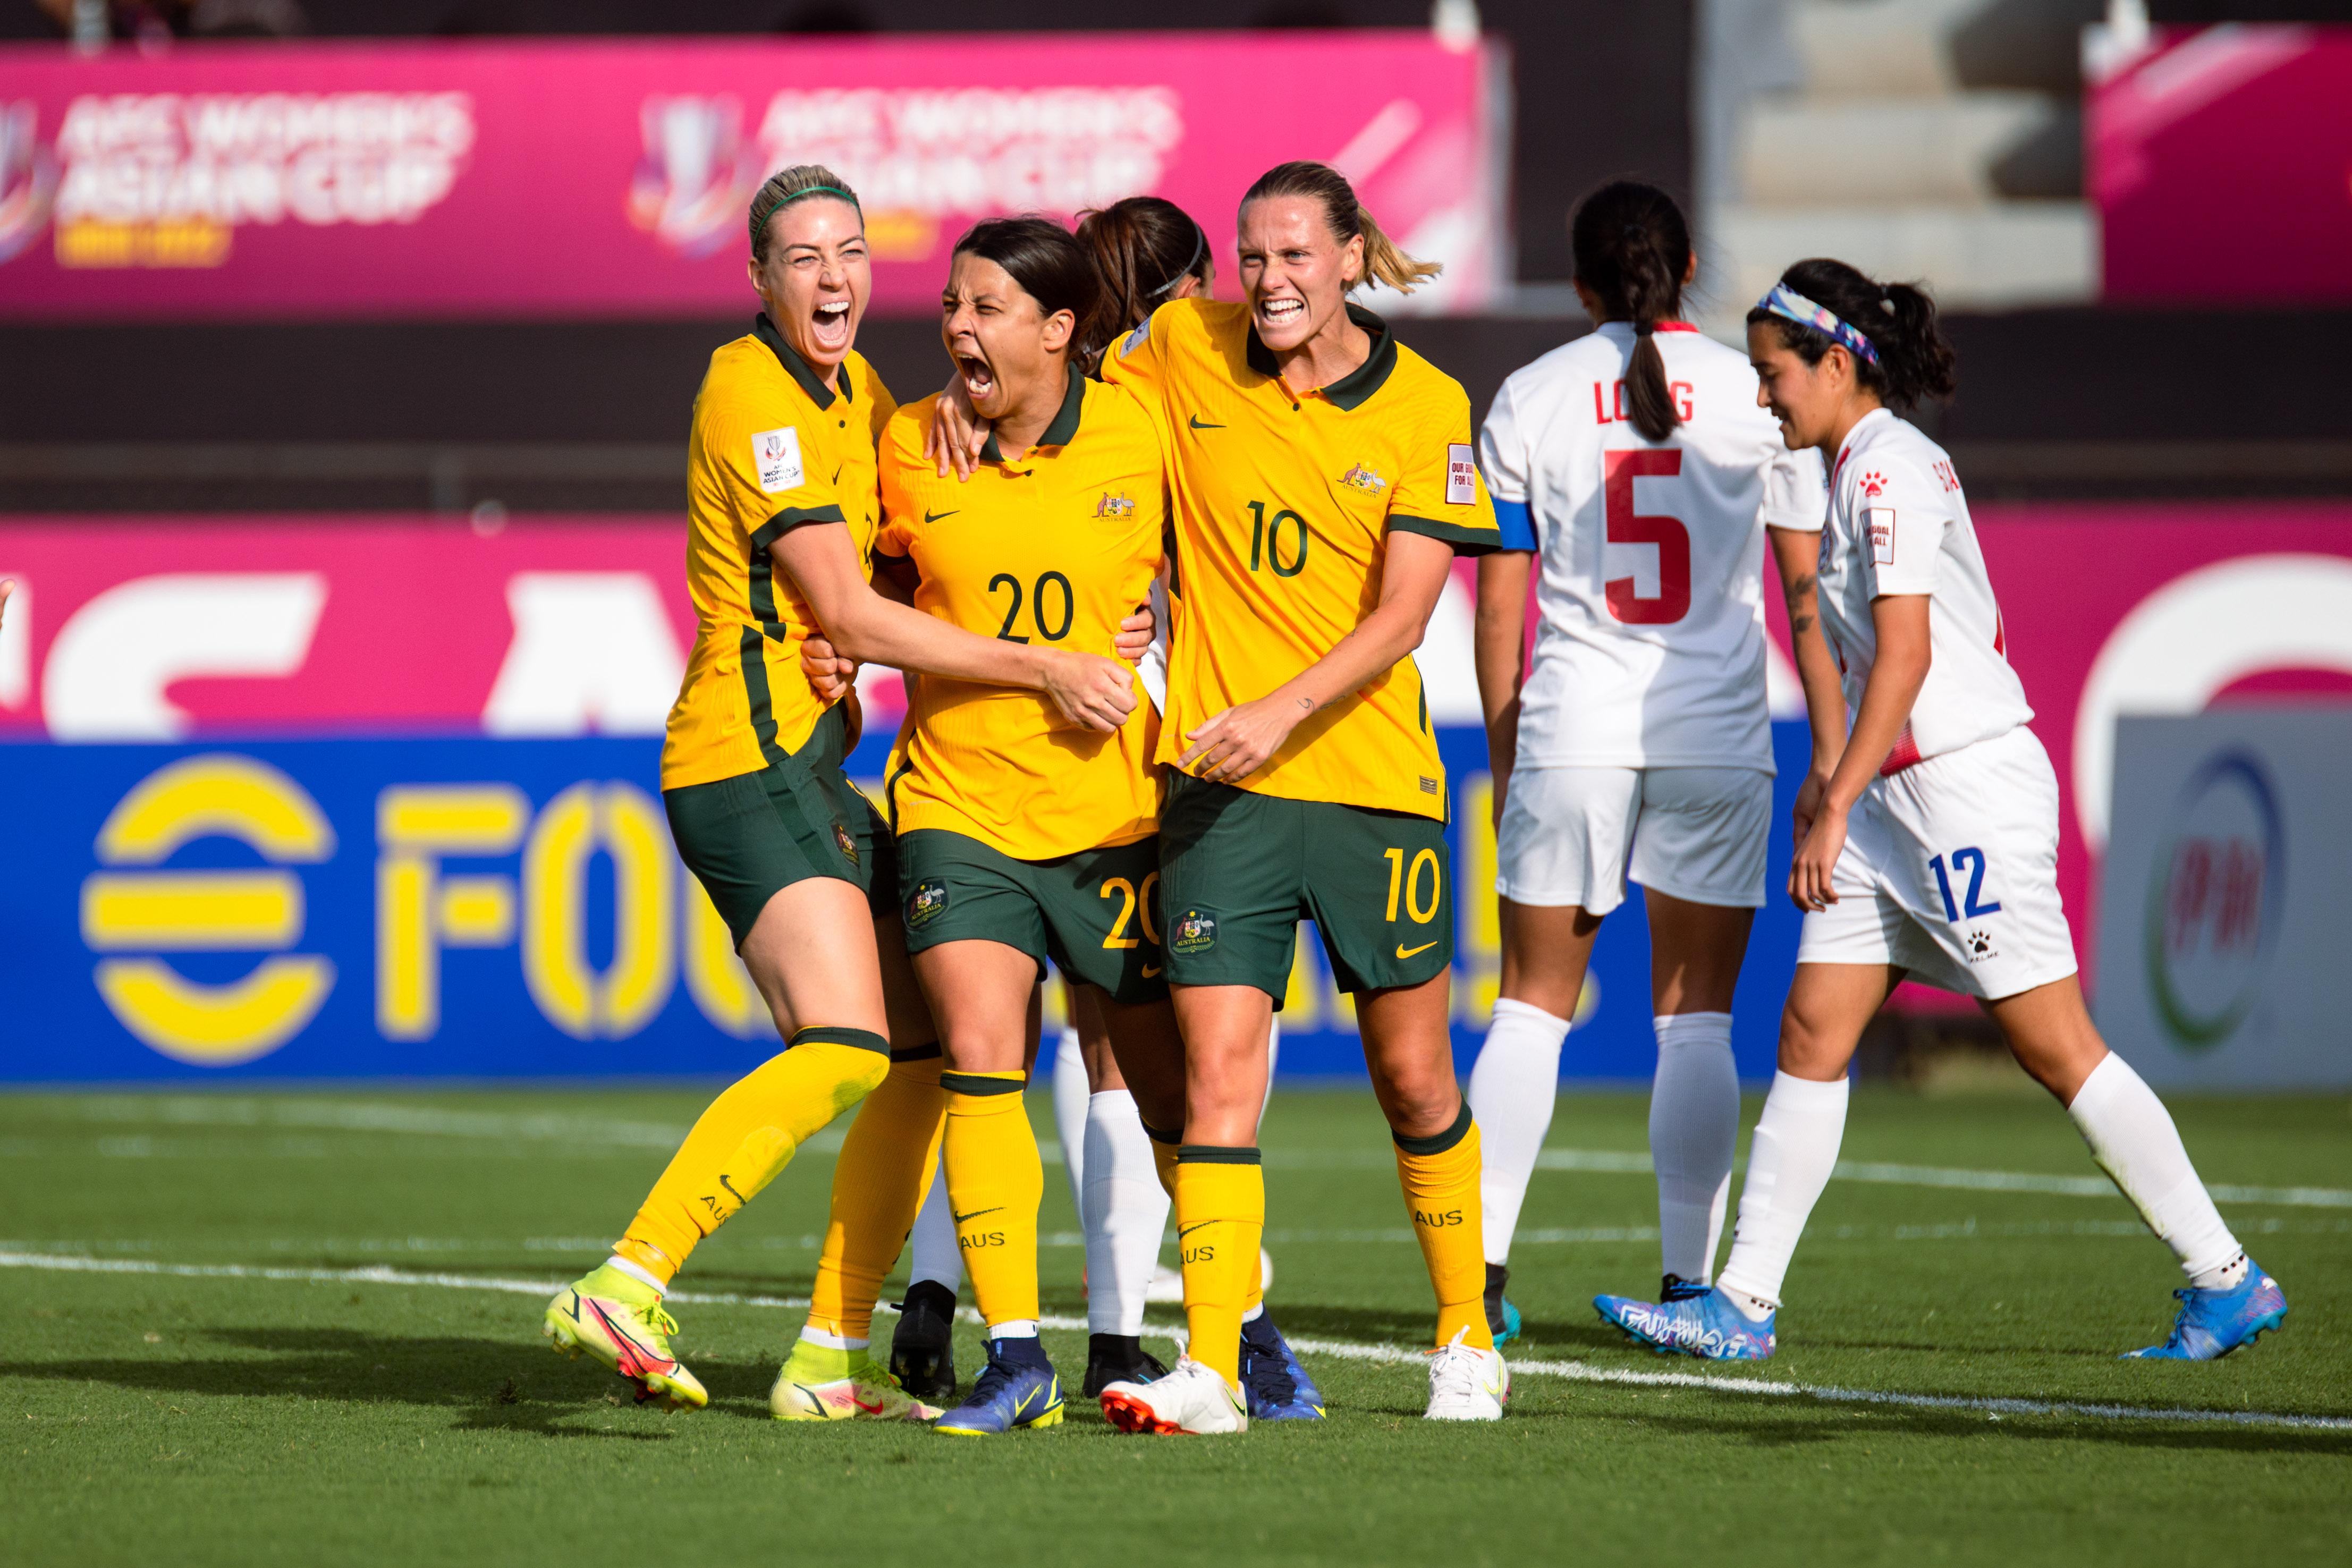  Sam Kerr of Australia celebrates scoring her side's first goal with teammates during the AFC Women's Asian Cup Group B match between Philippines and Australia at Mumbai Football Arena on January 24, 2022 in Mumbai, India. (Photo: Ann Odong/Football Australia)